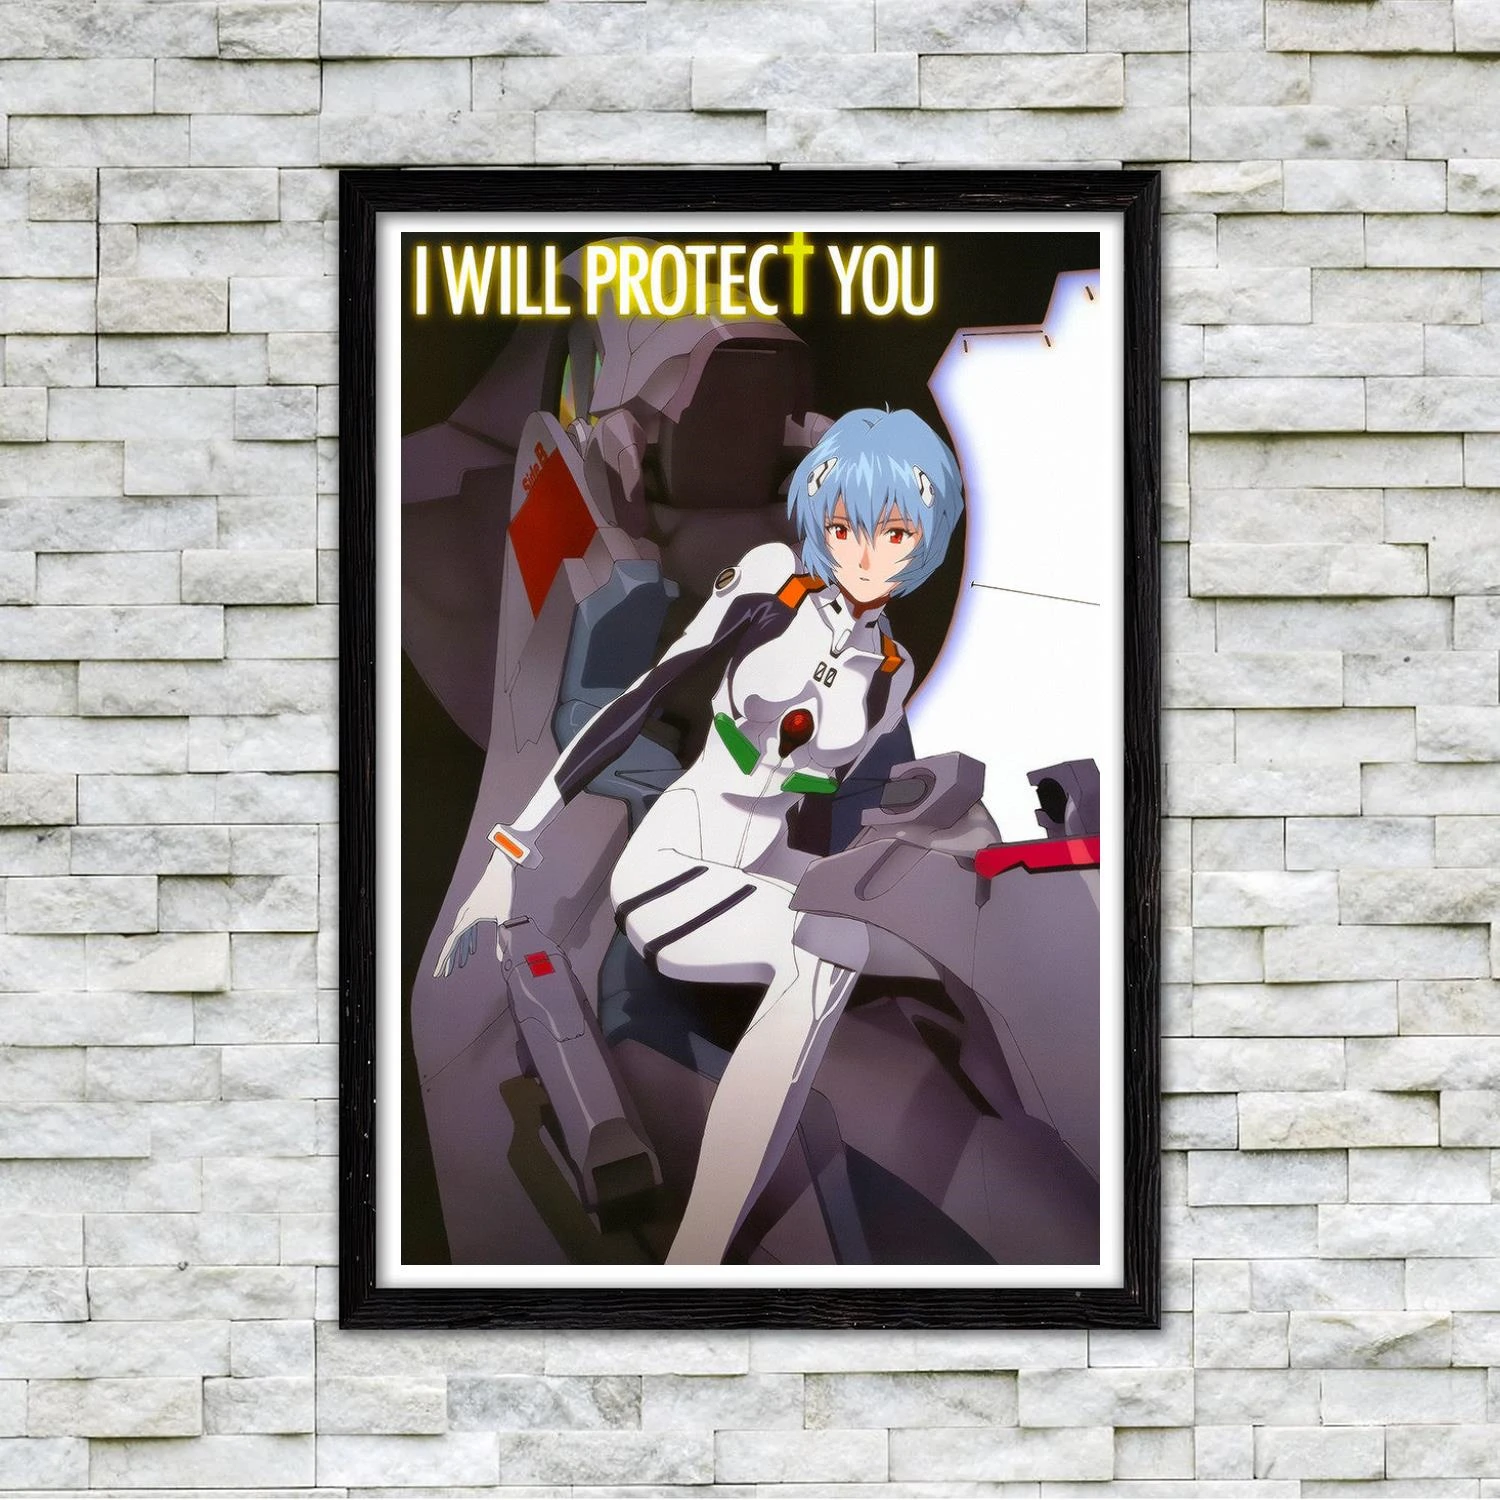 Classic Neons Genesis Asuka Mari Evangelions Poster Canvas Painting Posters and Prints Wall Art Picture Home 2 - Evangelion Store